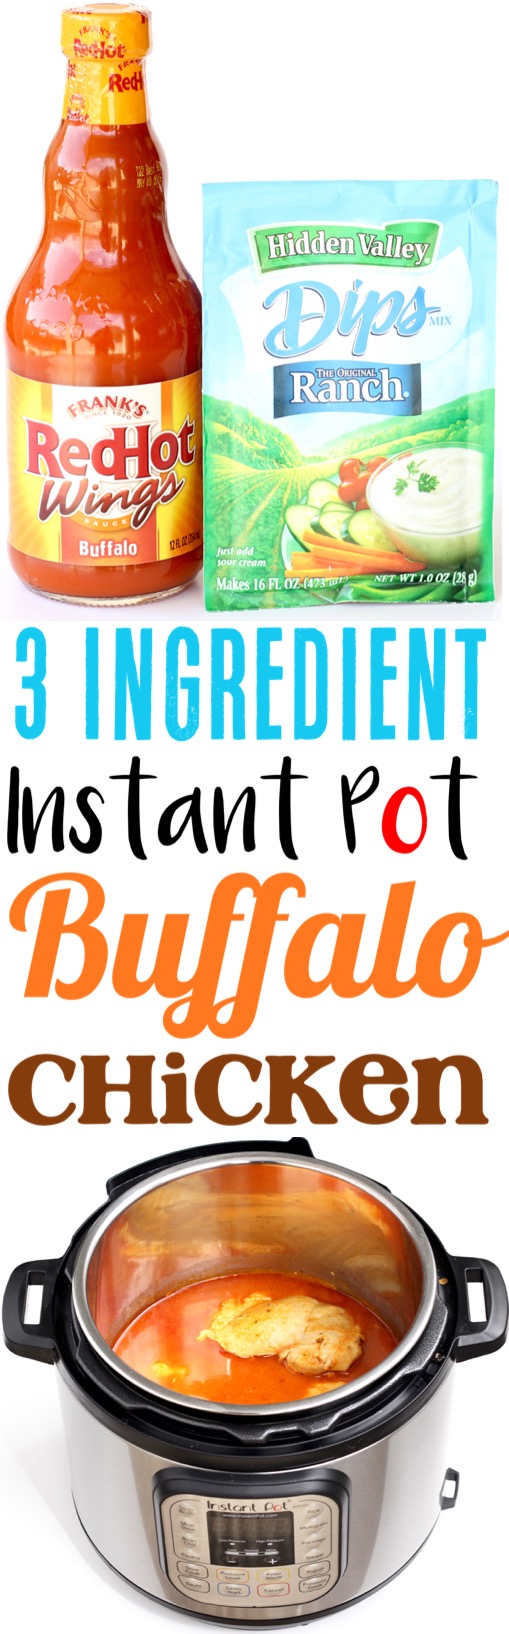 Instant Pot Chicken Recipes Healthy Low Carb Buffalo Ranch Chicken